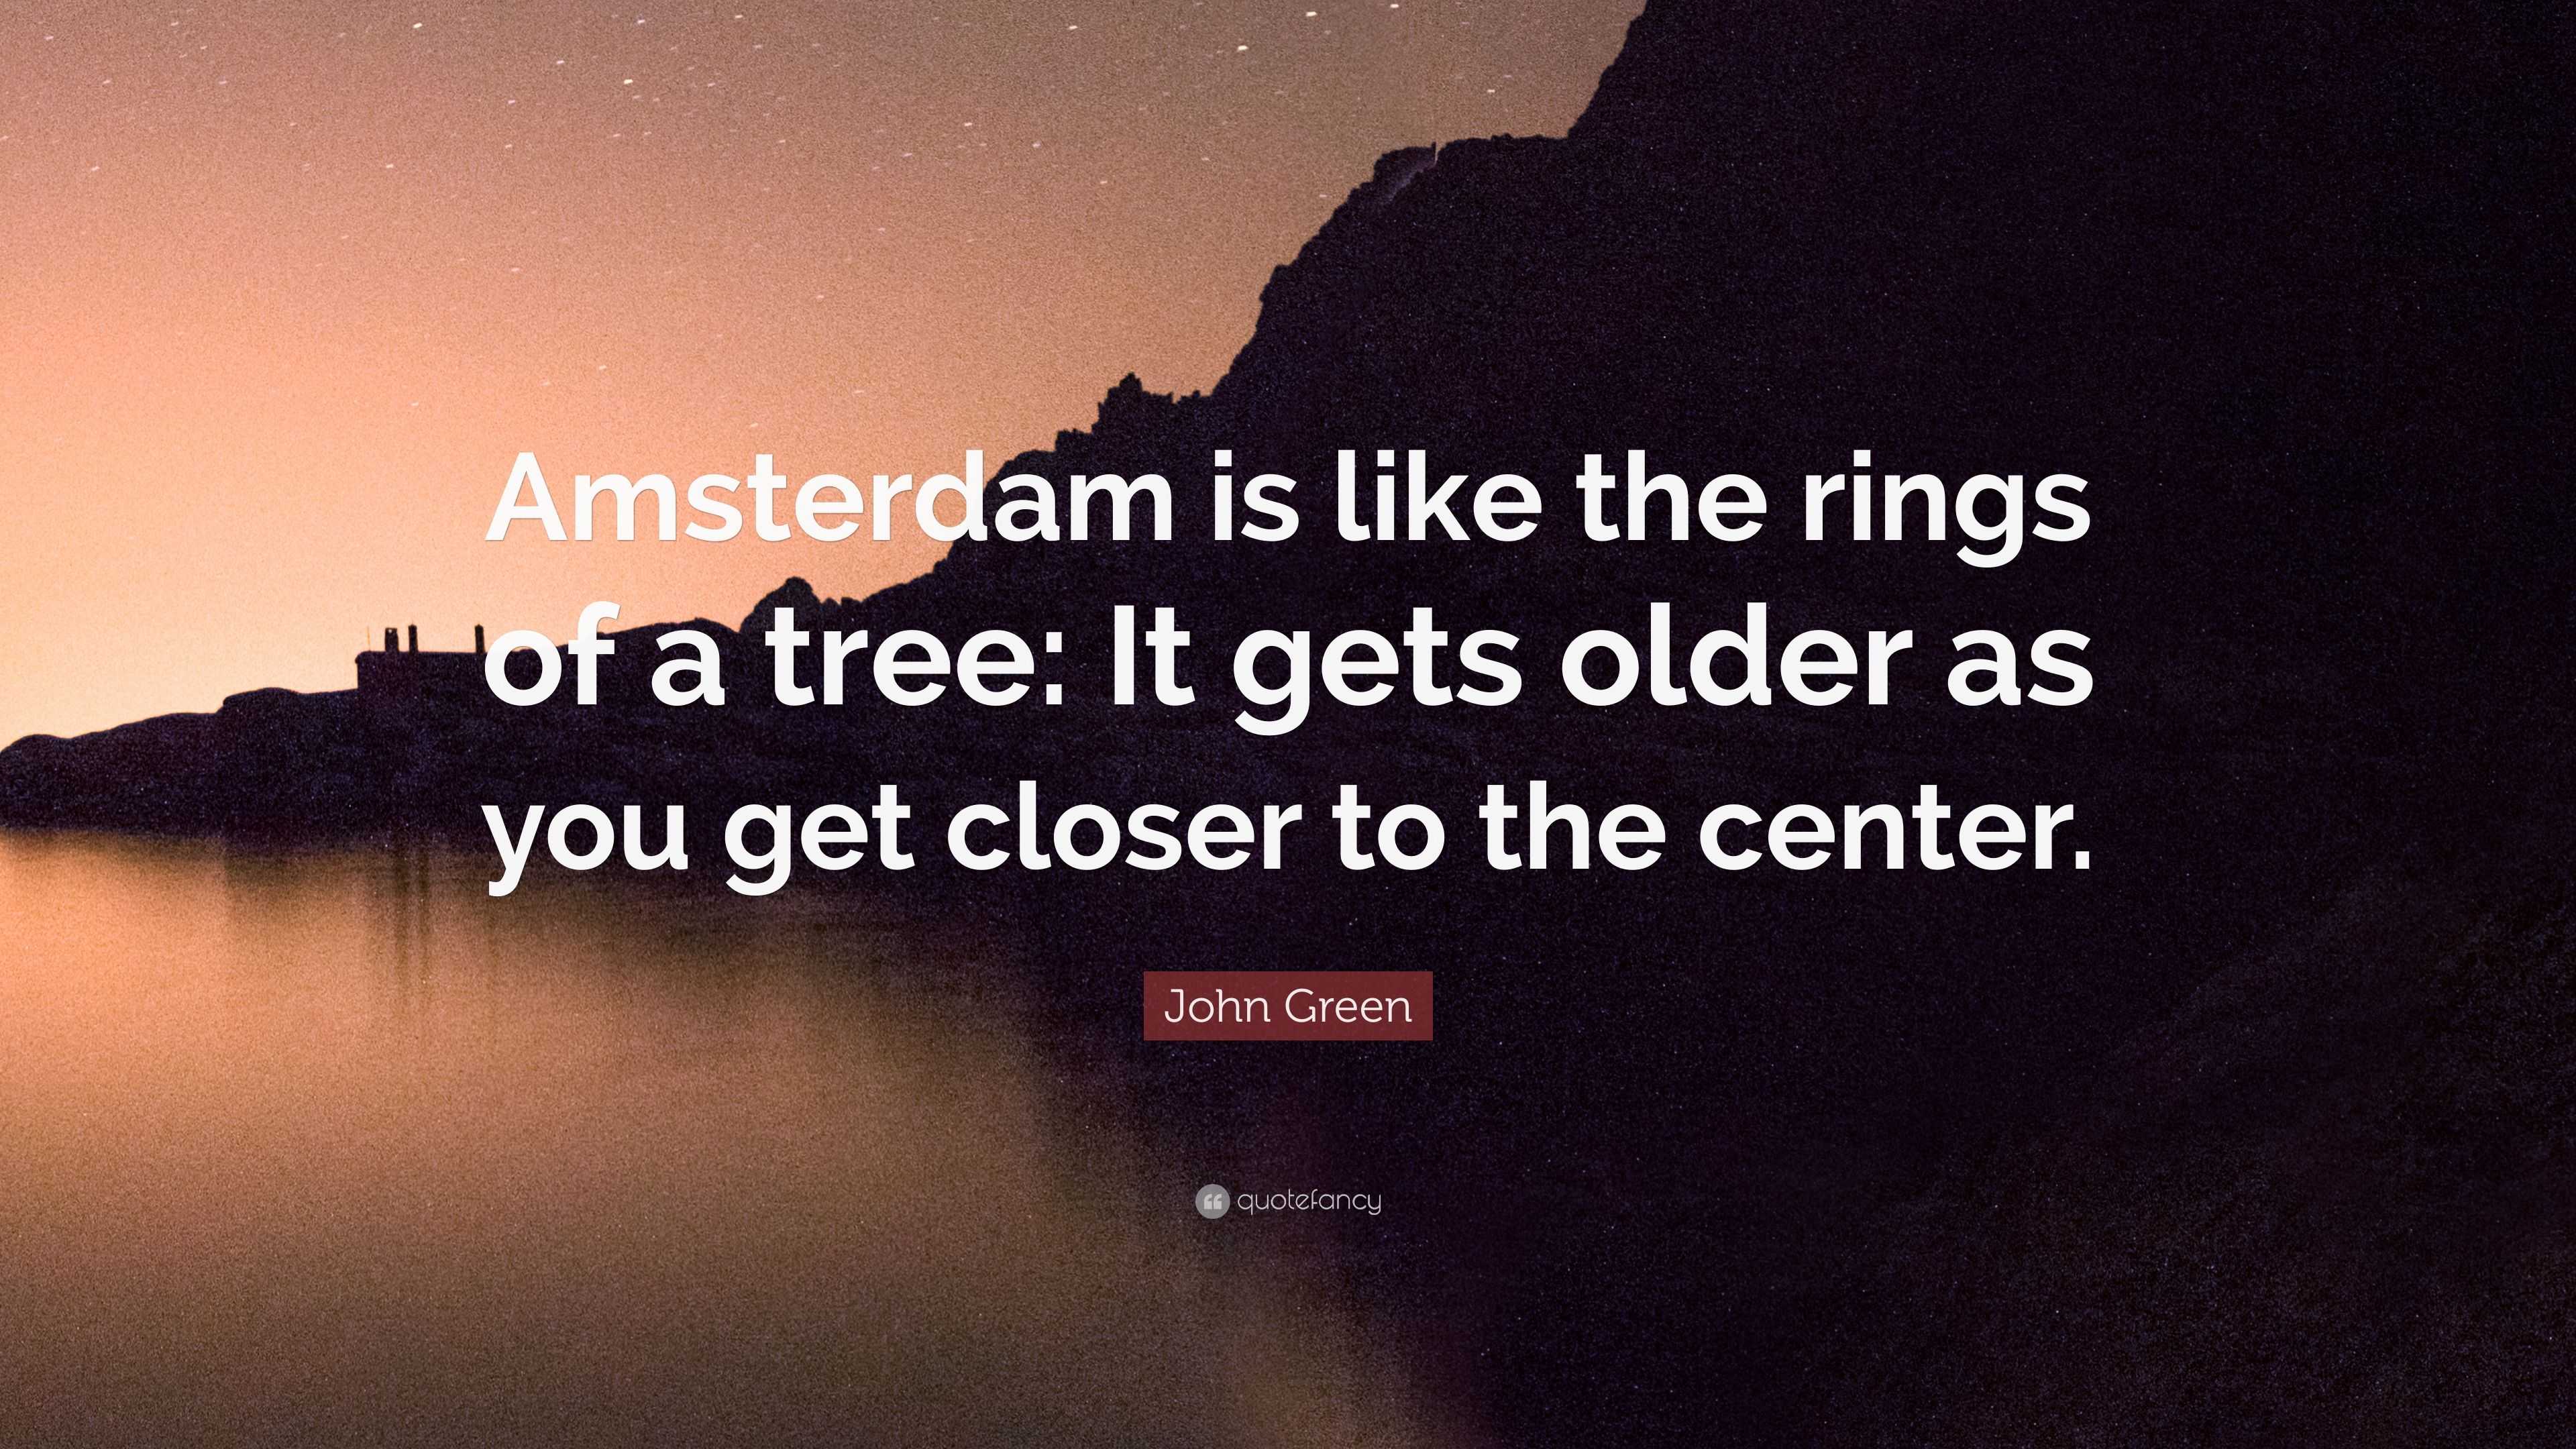 John Green Quote “Amsterdam is like the rings of a tree It s